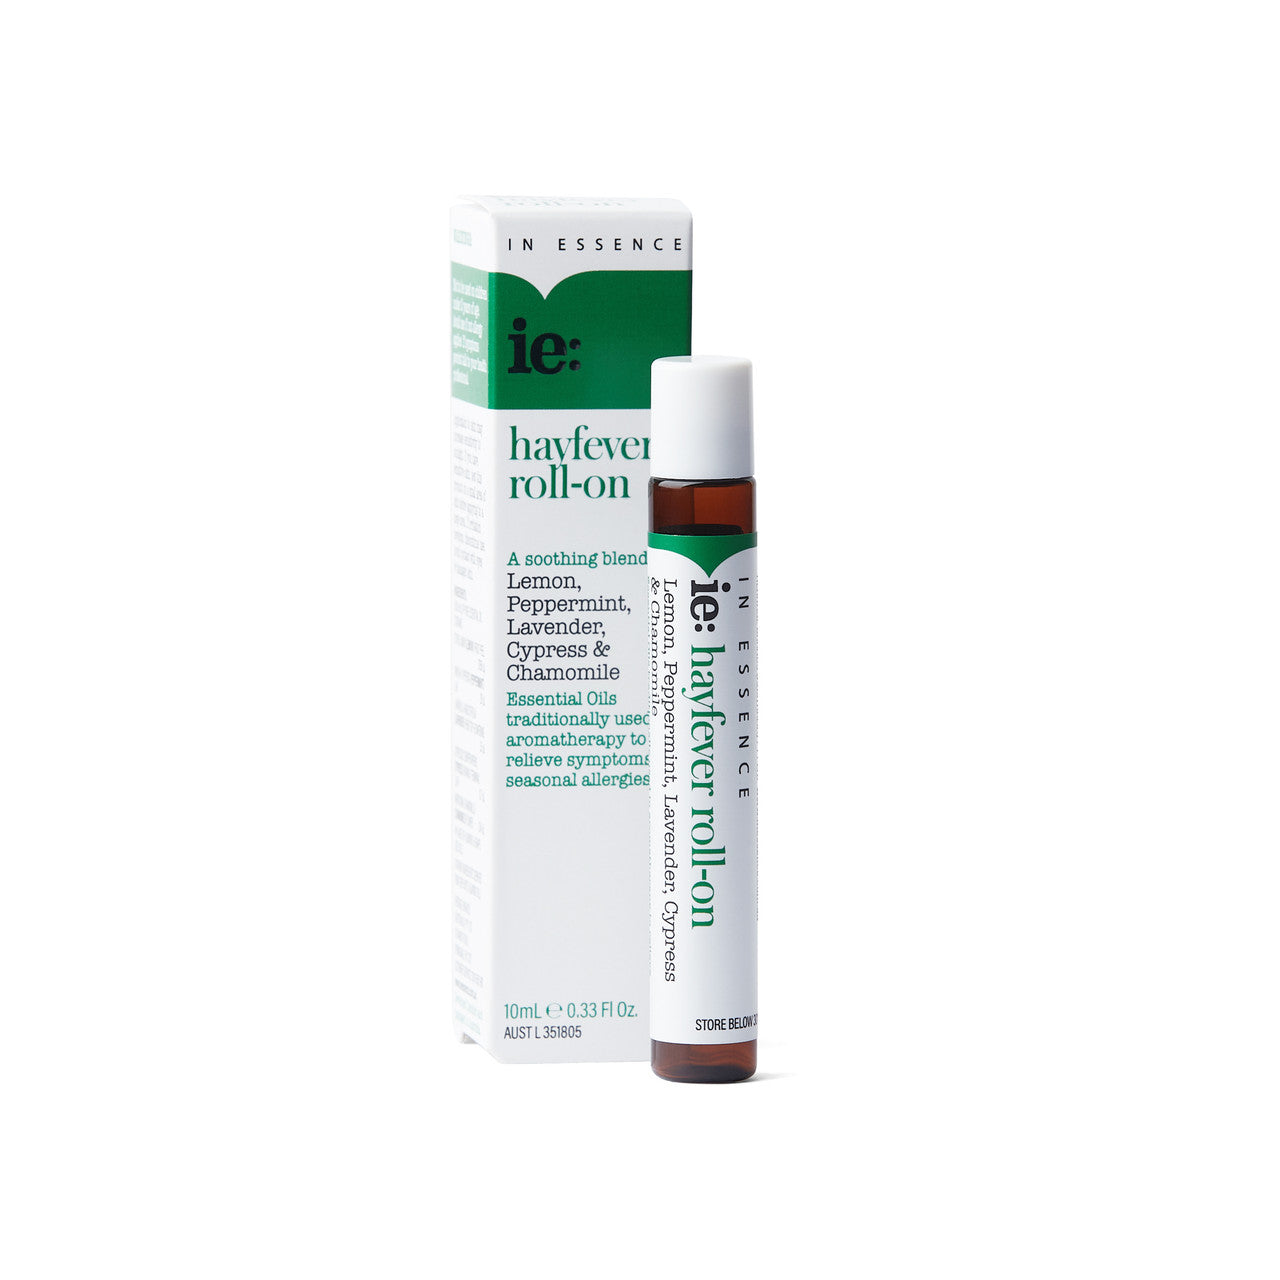 IE ROLL ON HAYFEVER 100% Pure Essential Oil 10ml